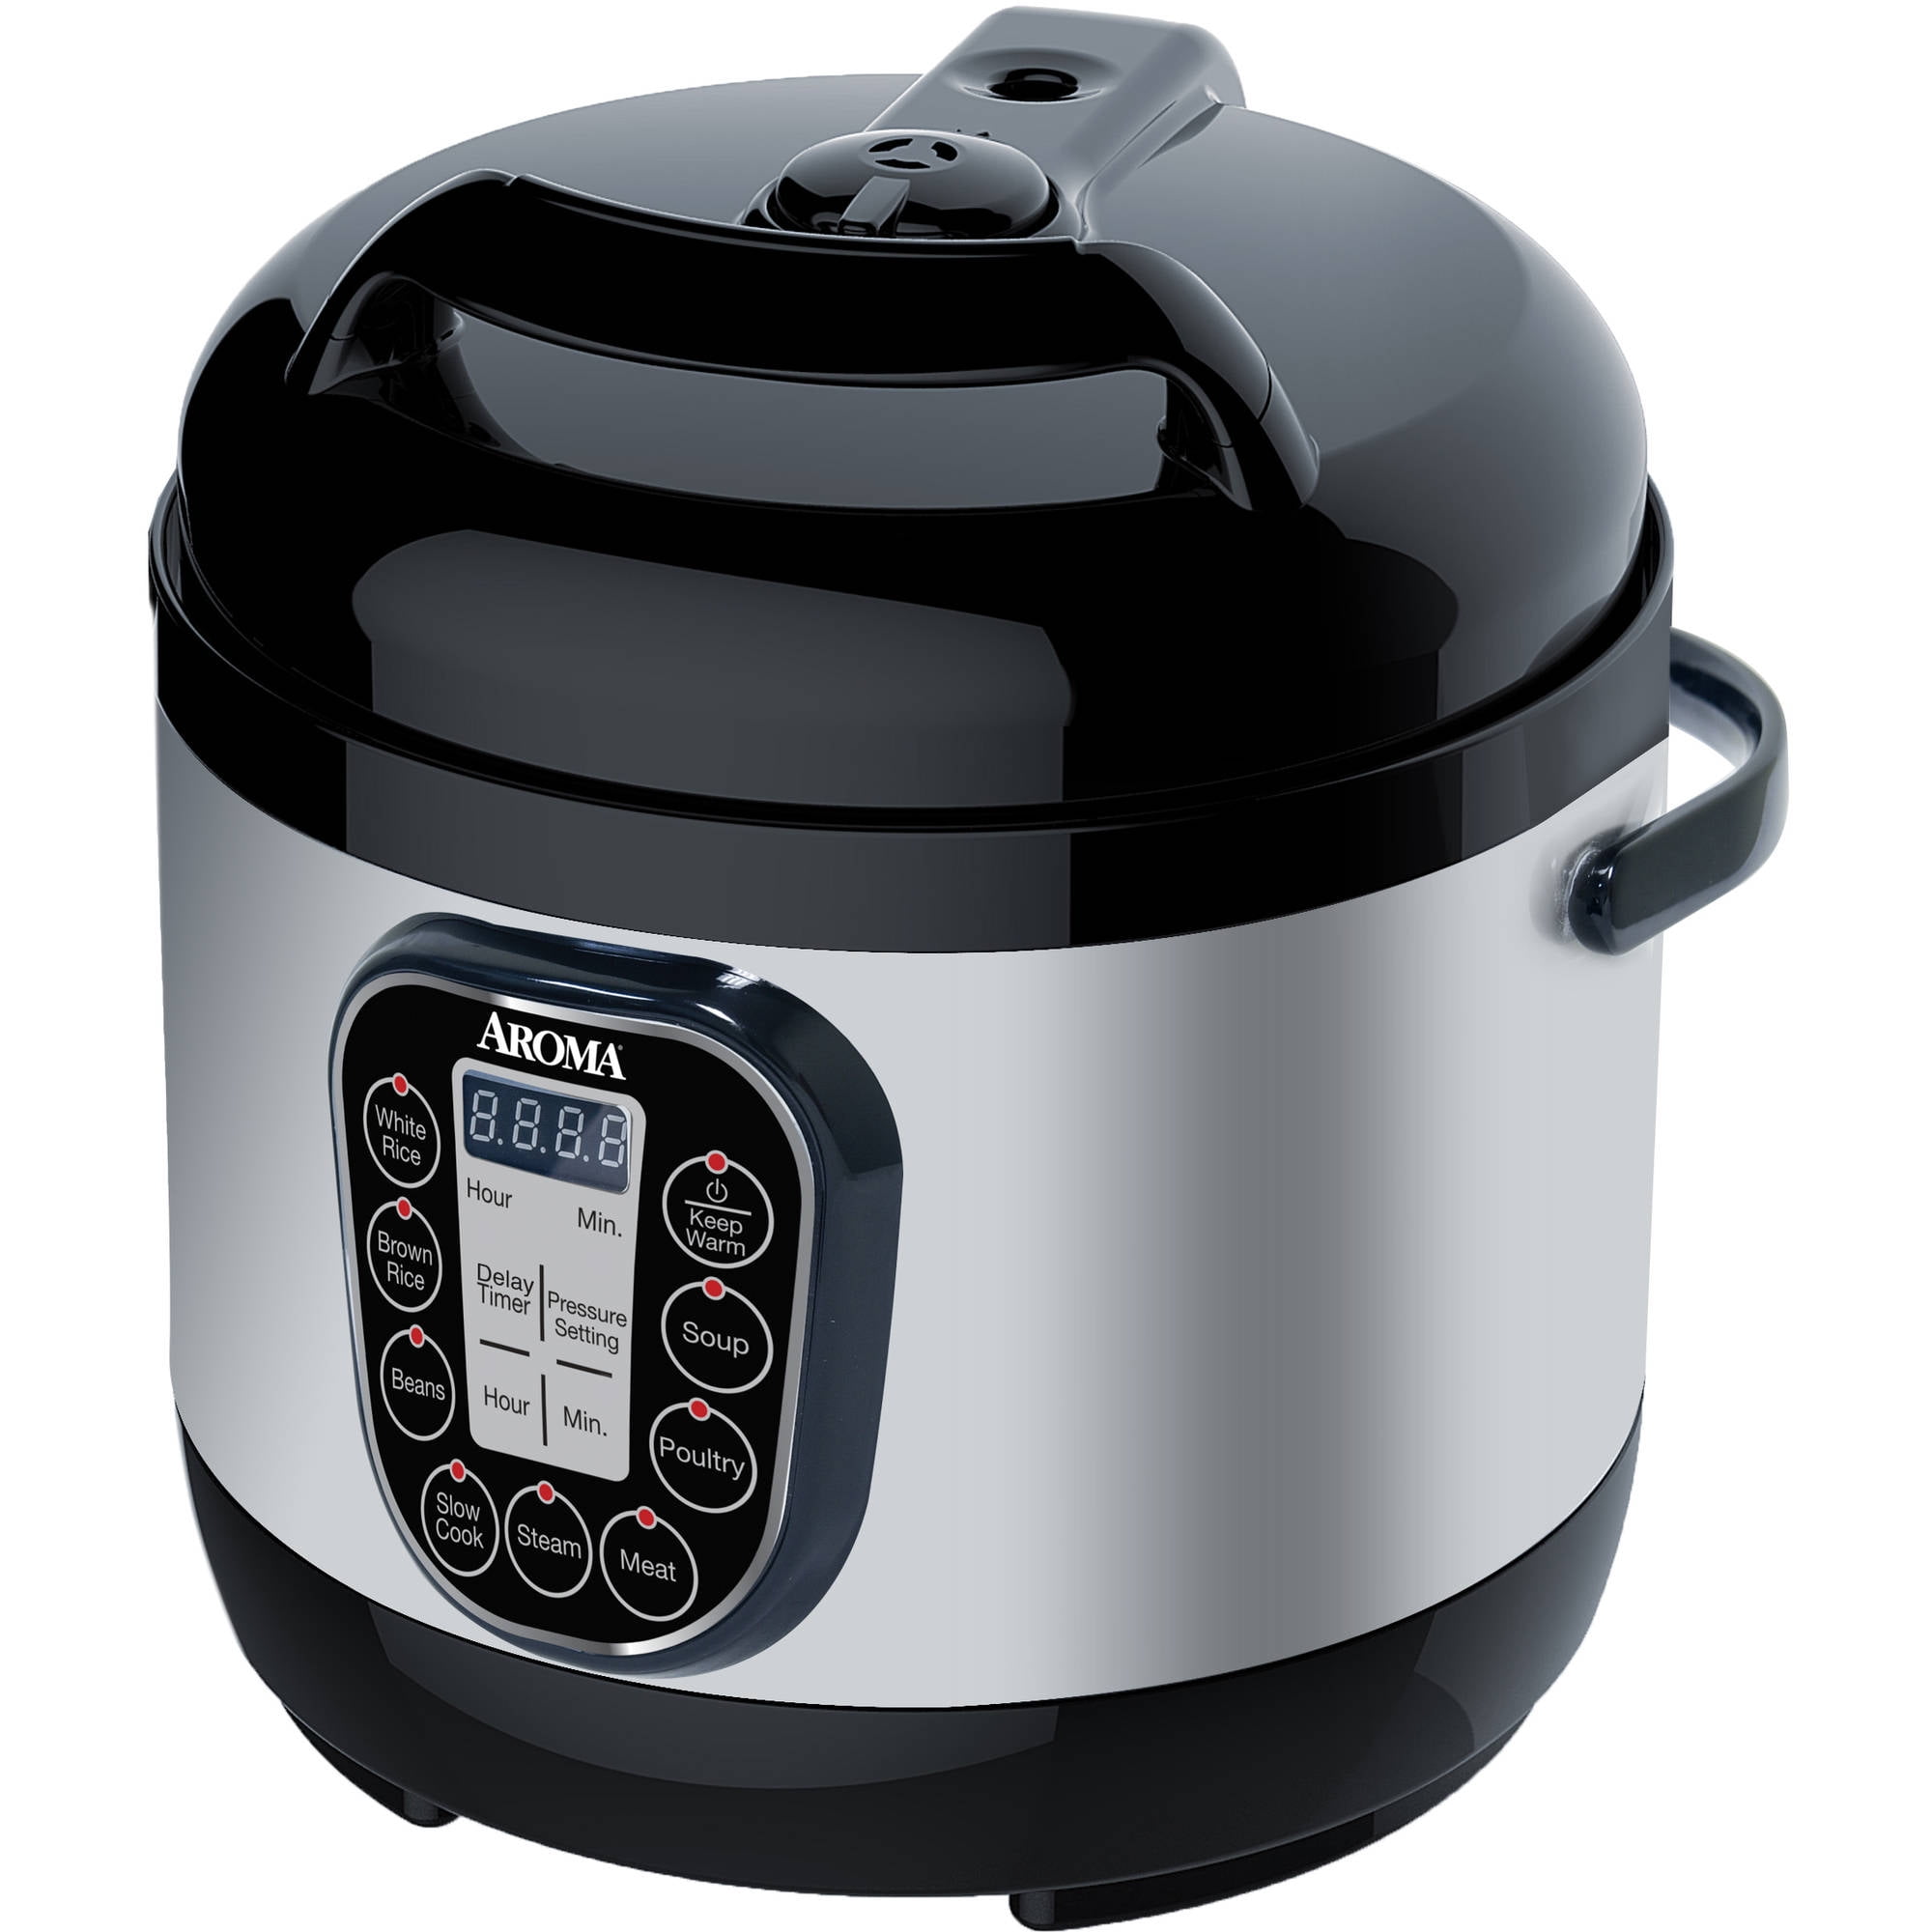 Where can you find Aroma rice cooker manuals?